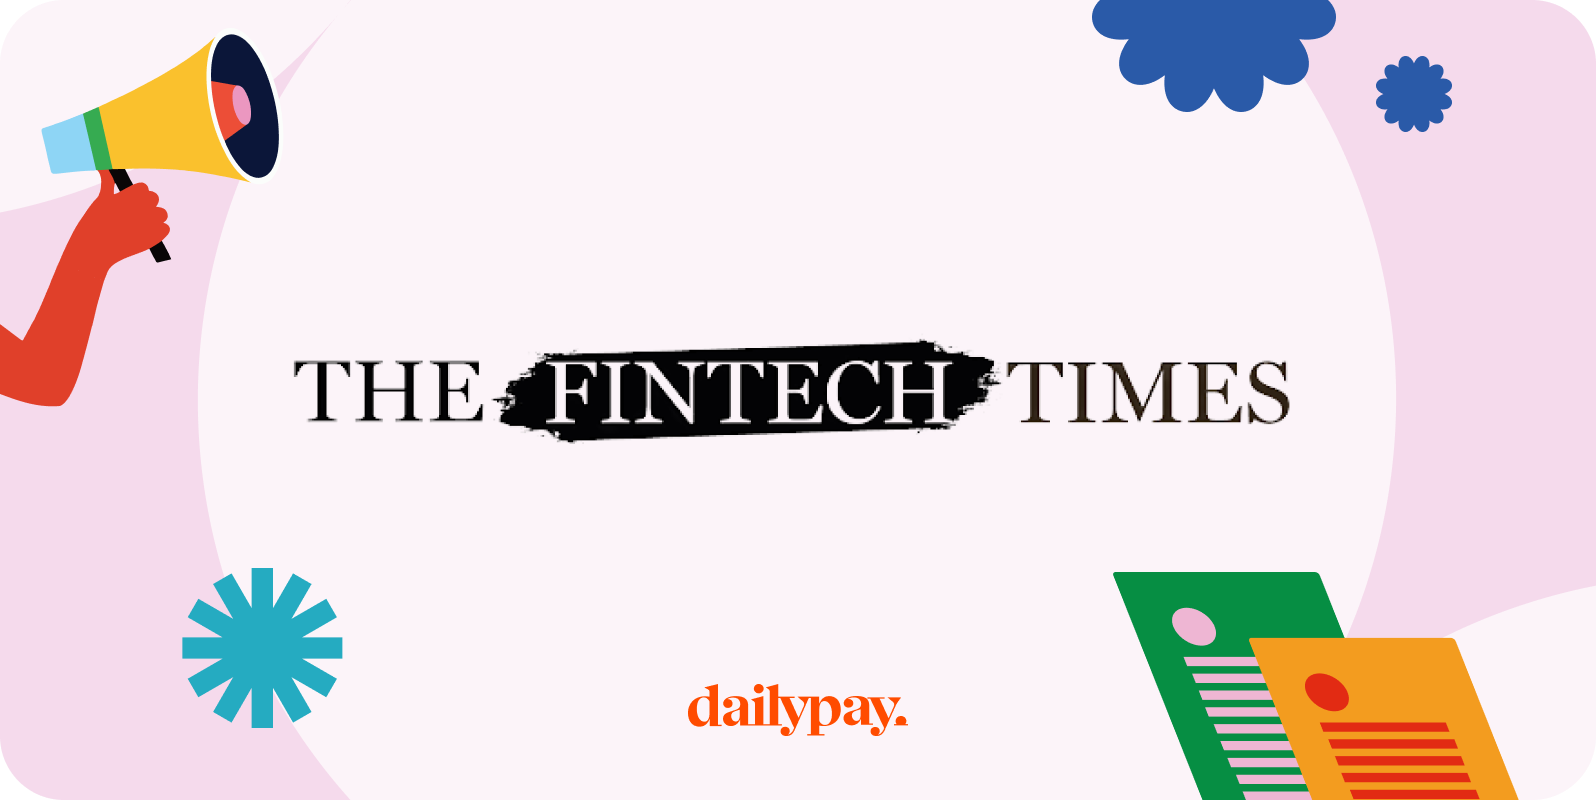 Logo for The Fintech Times with colorful illustrations, including a hand holding a megaphone, decorative shapes, and two sheets of paper. The logo "dailypay" is at the bottom center.